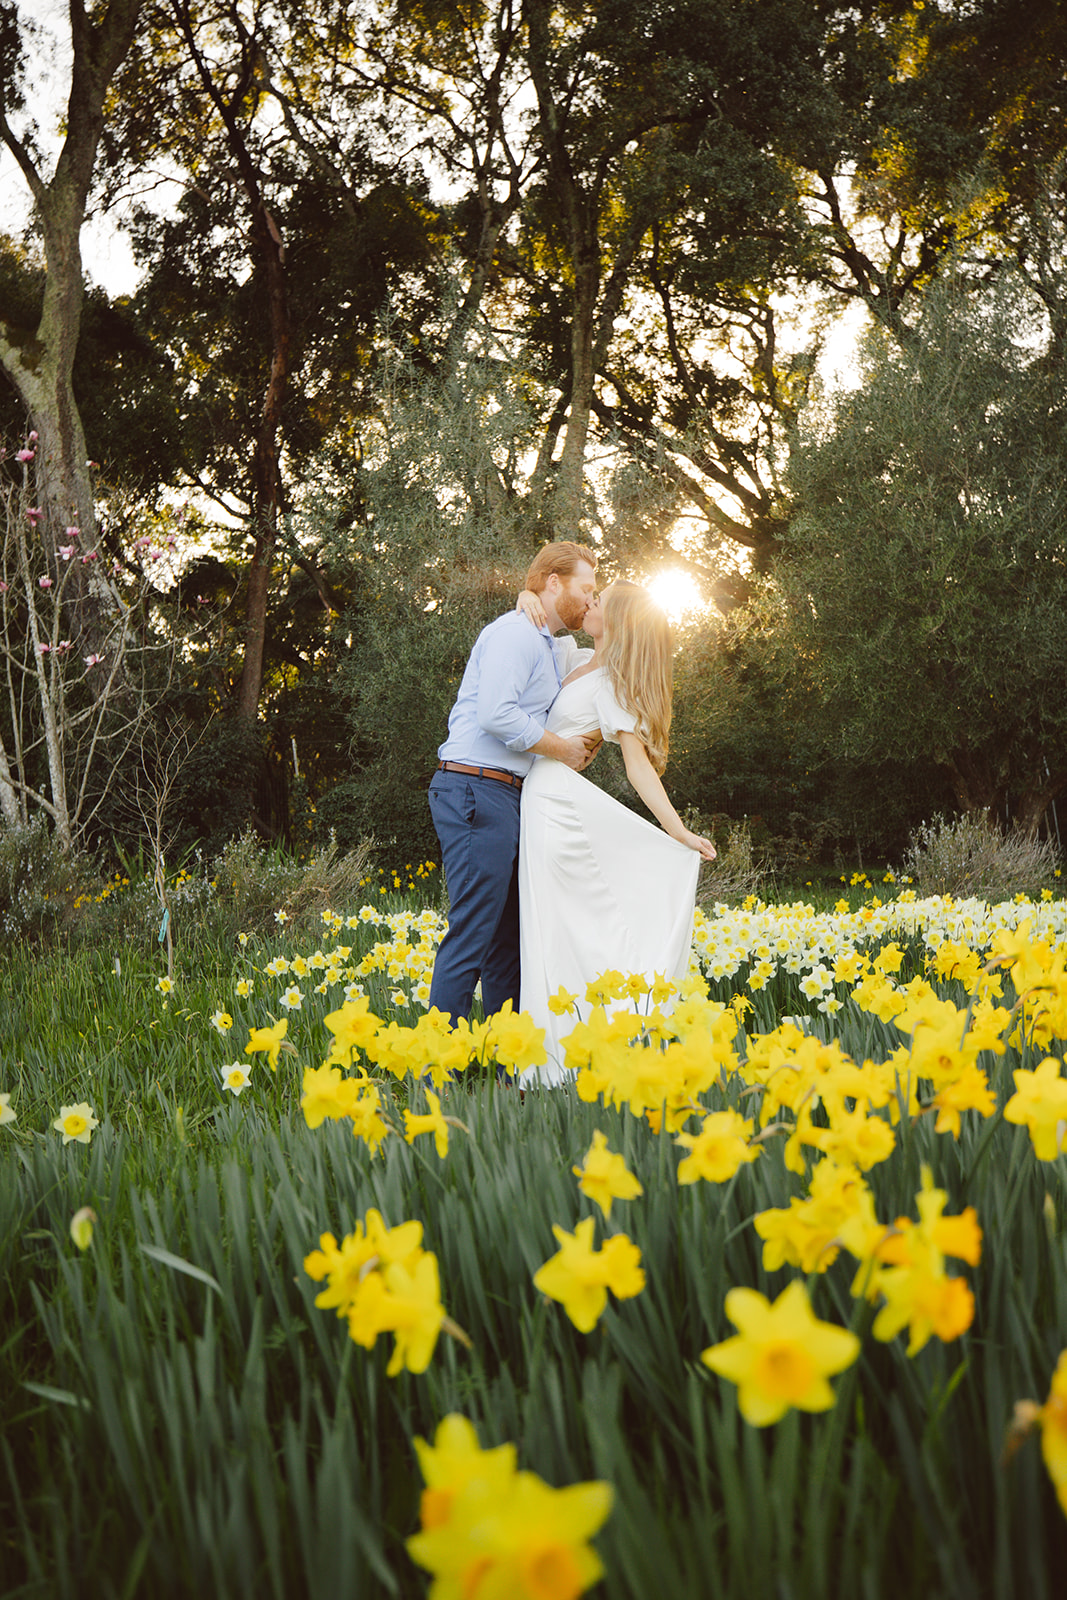 A couple embracing and smiling at Filoli Gardens, taking their engagement photos, both dressed in casual attire.